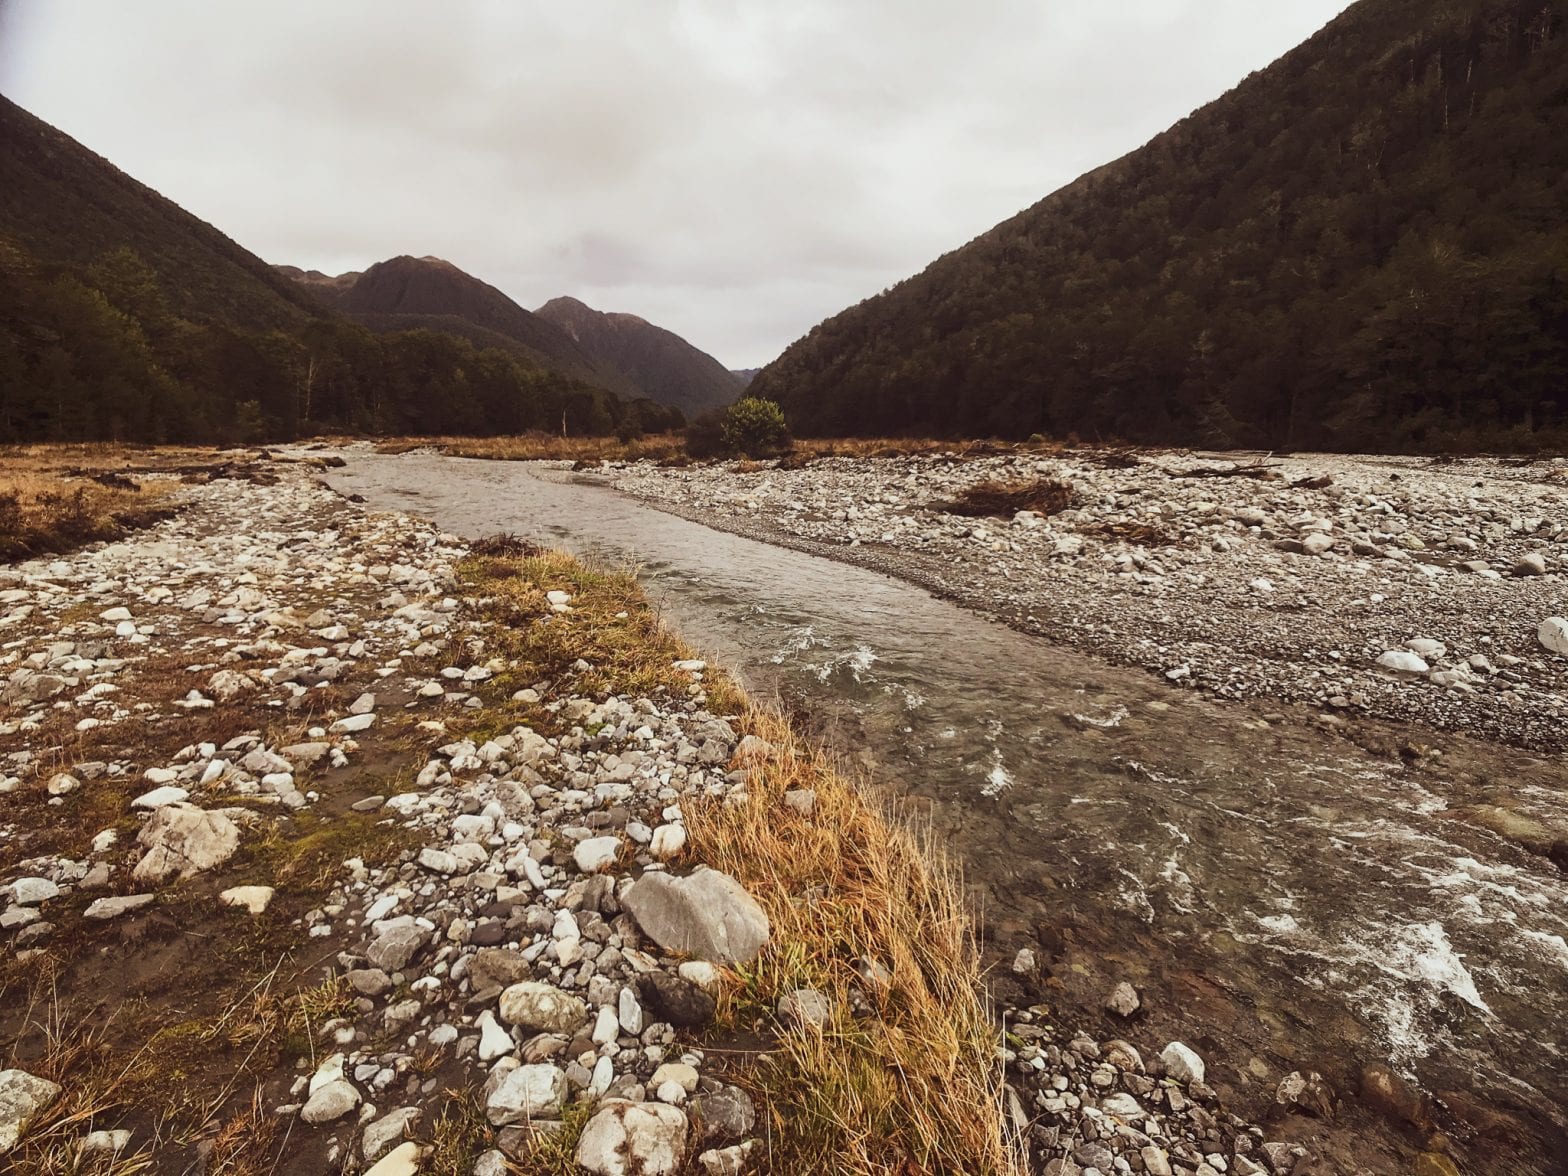 New Zealand Wilderness: Exploring Lewis Pass & The Maruia Valley